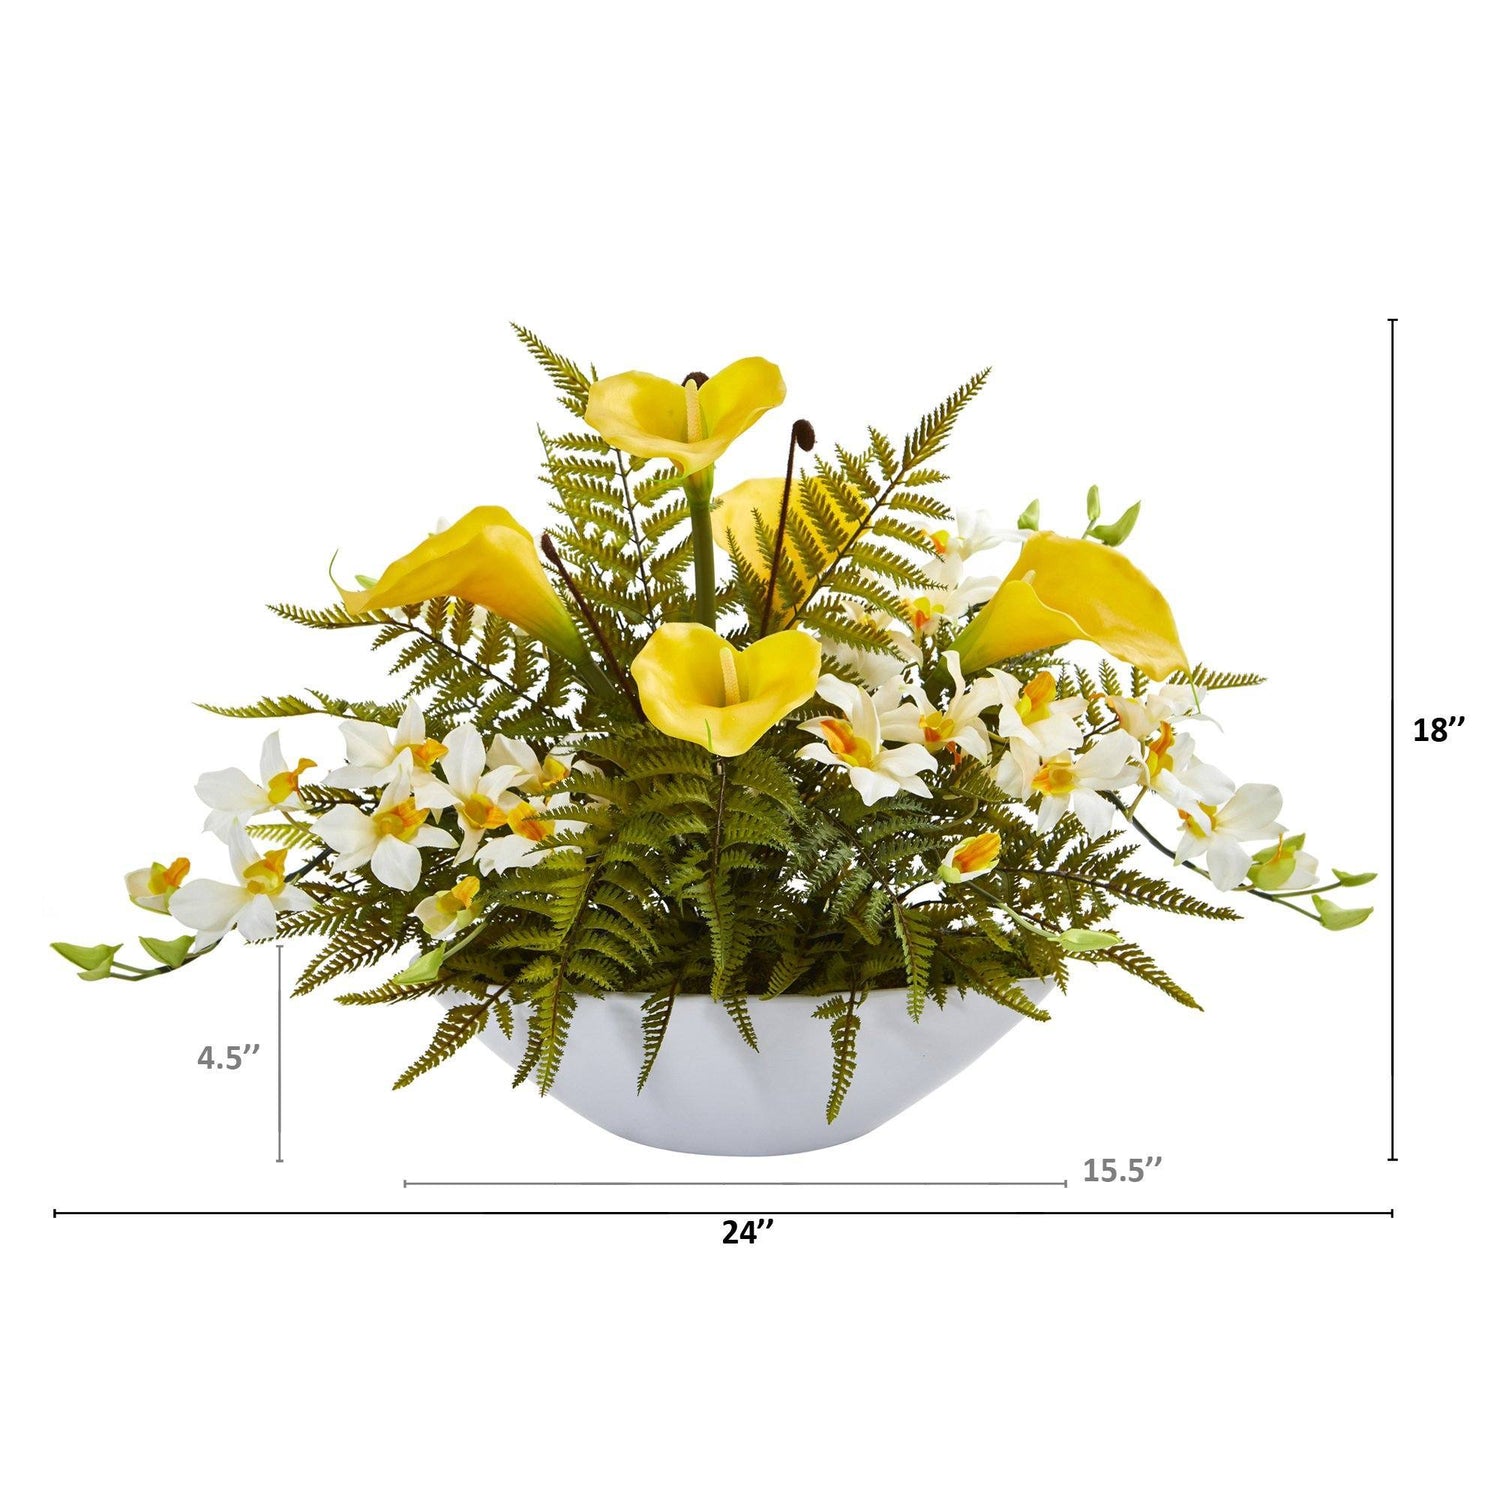 24” Calla Lilly, Dendrobium Orchid and Fern Artificial Arrangement in White Vase